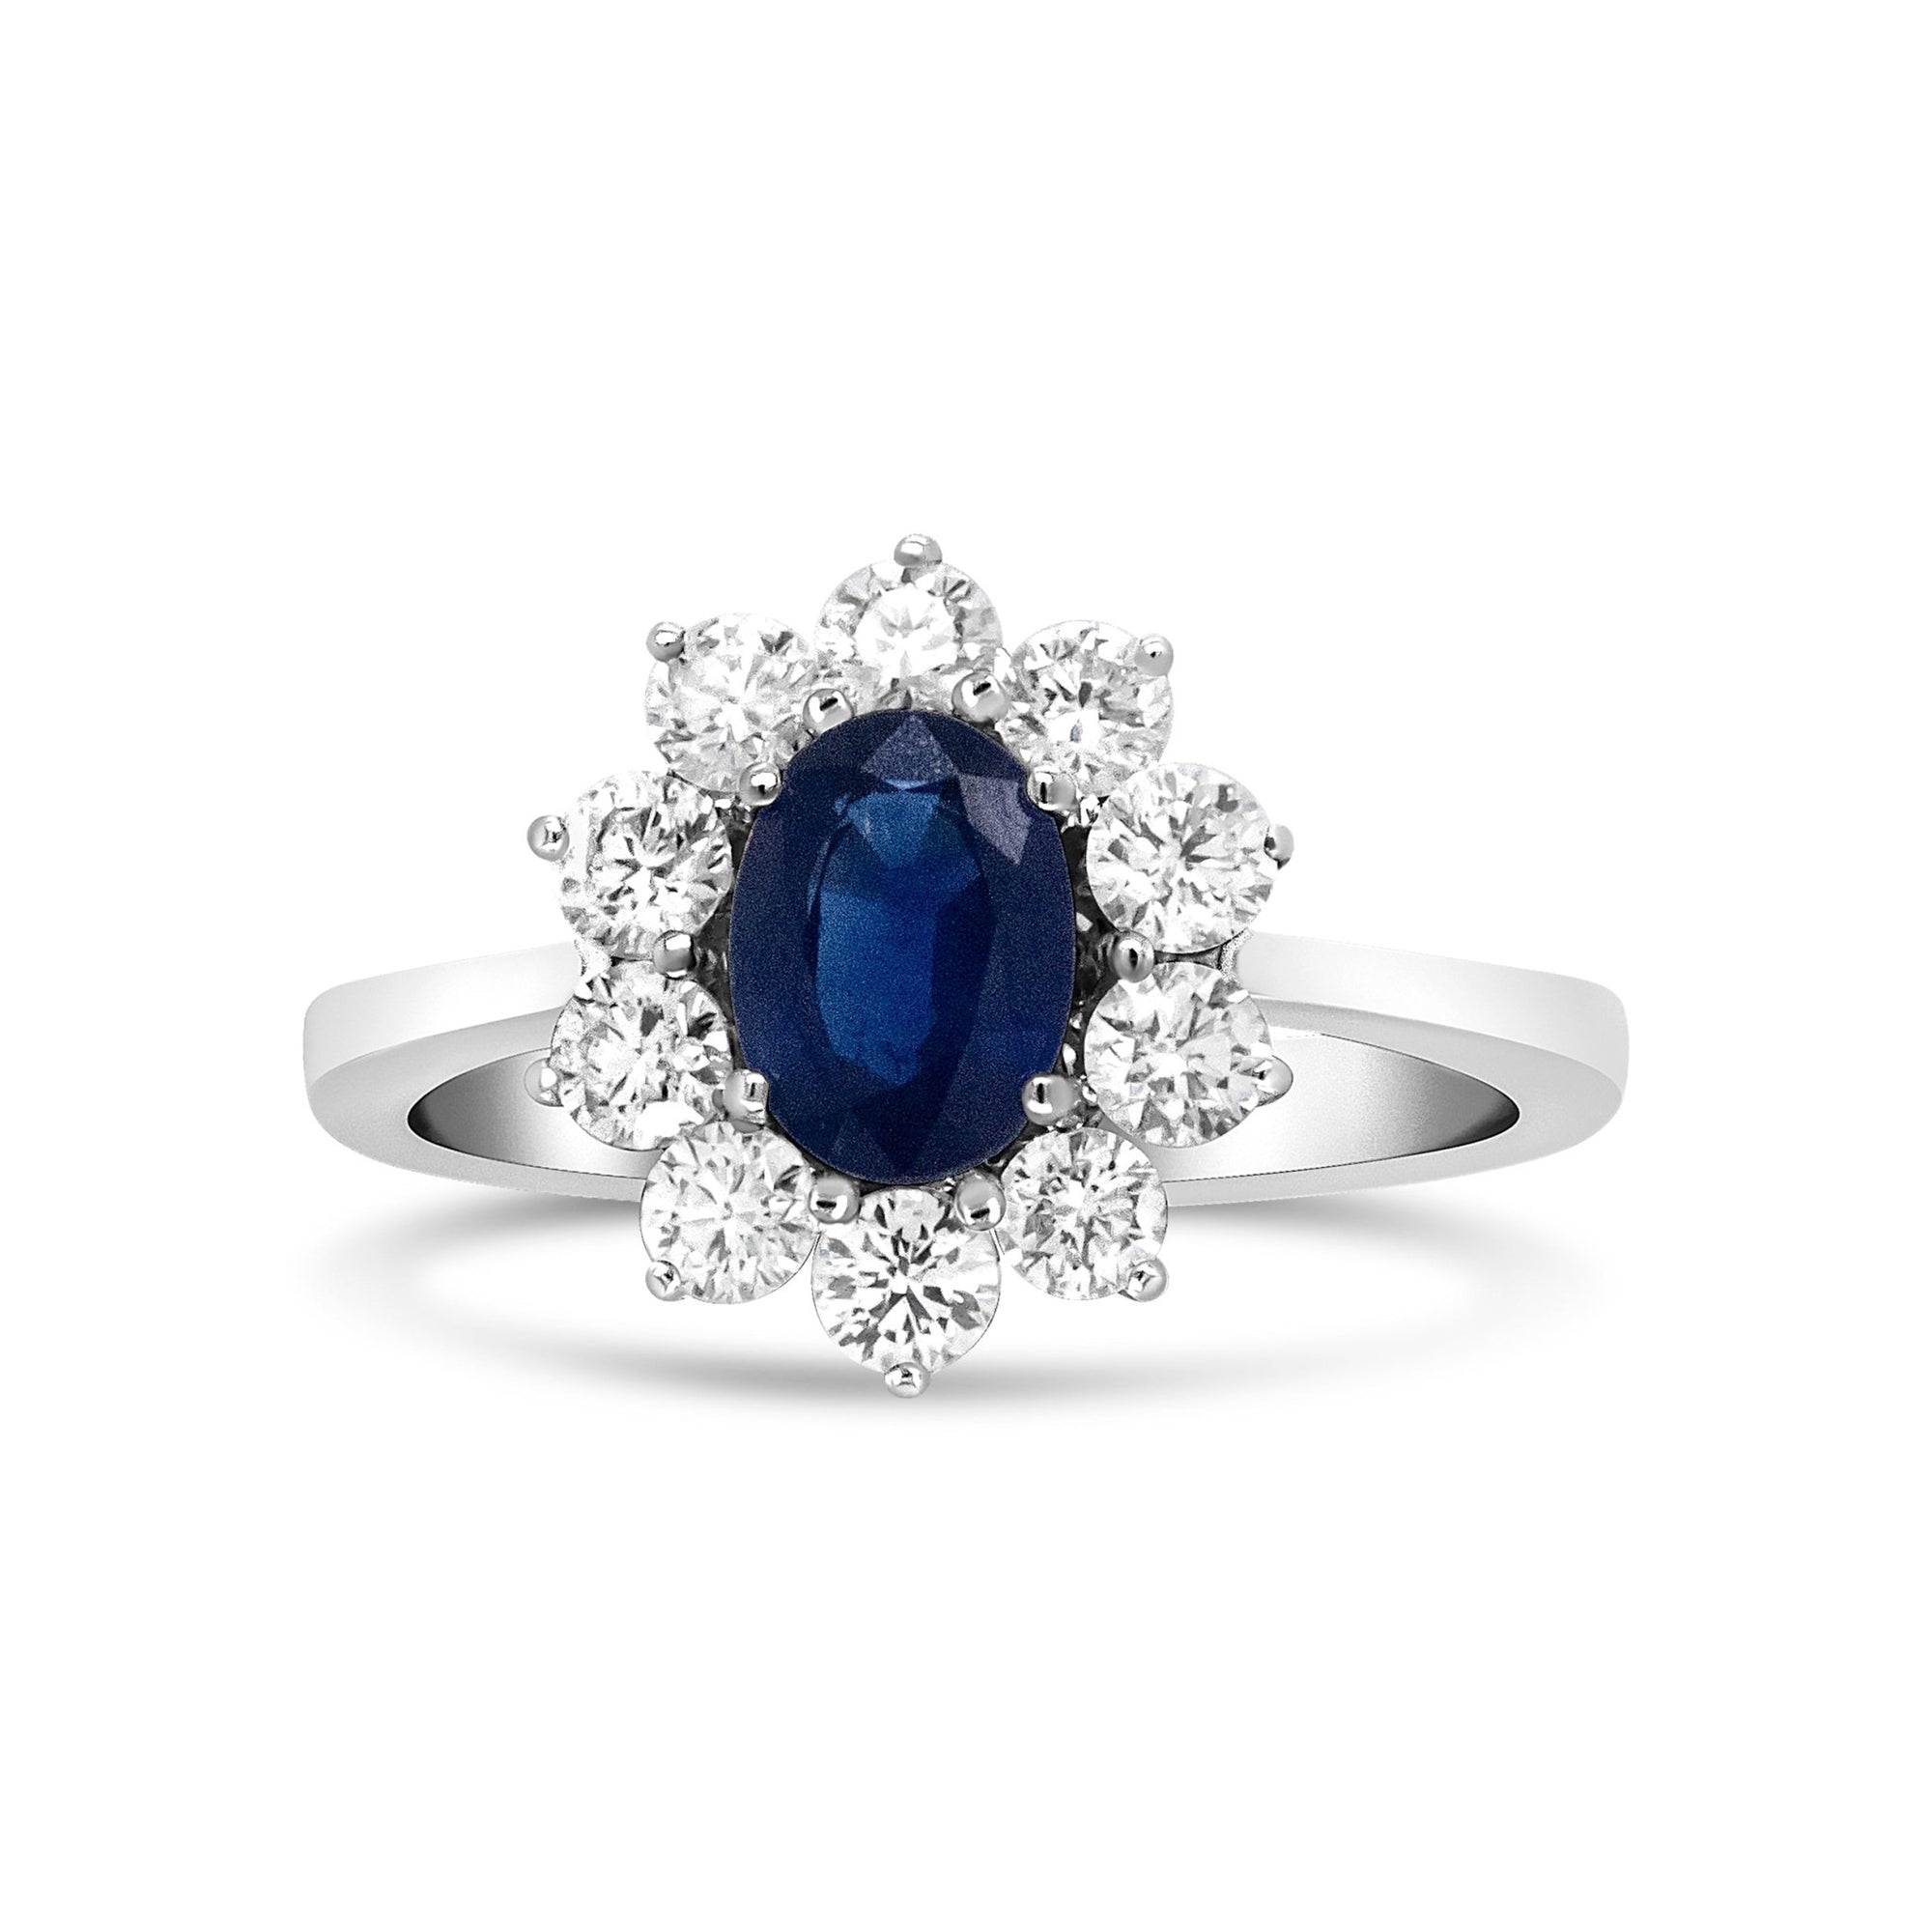 18K White Gold 7x5 mm Oval Cut Blue Sapphire and Round Diamond 3/4 Cttw Sunburst Halo Ring (F-G Color, VS1-VS2 Clarity) - Ring Size 6.5 - LinkagejewelrydesignLinkagejewelrydesign